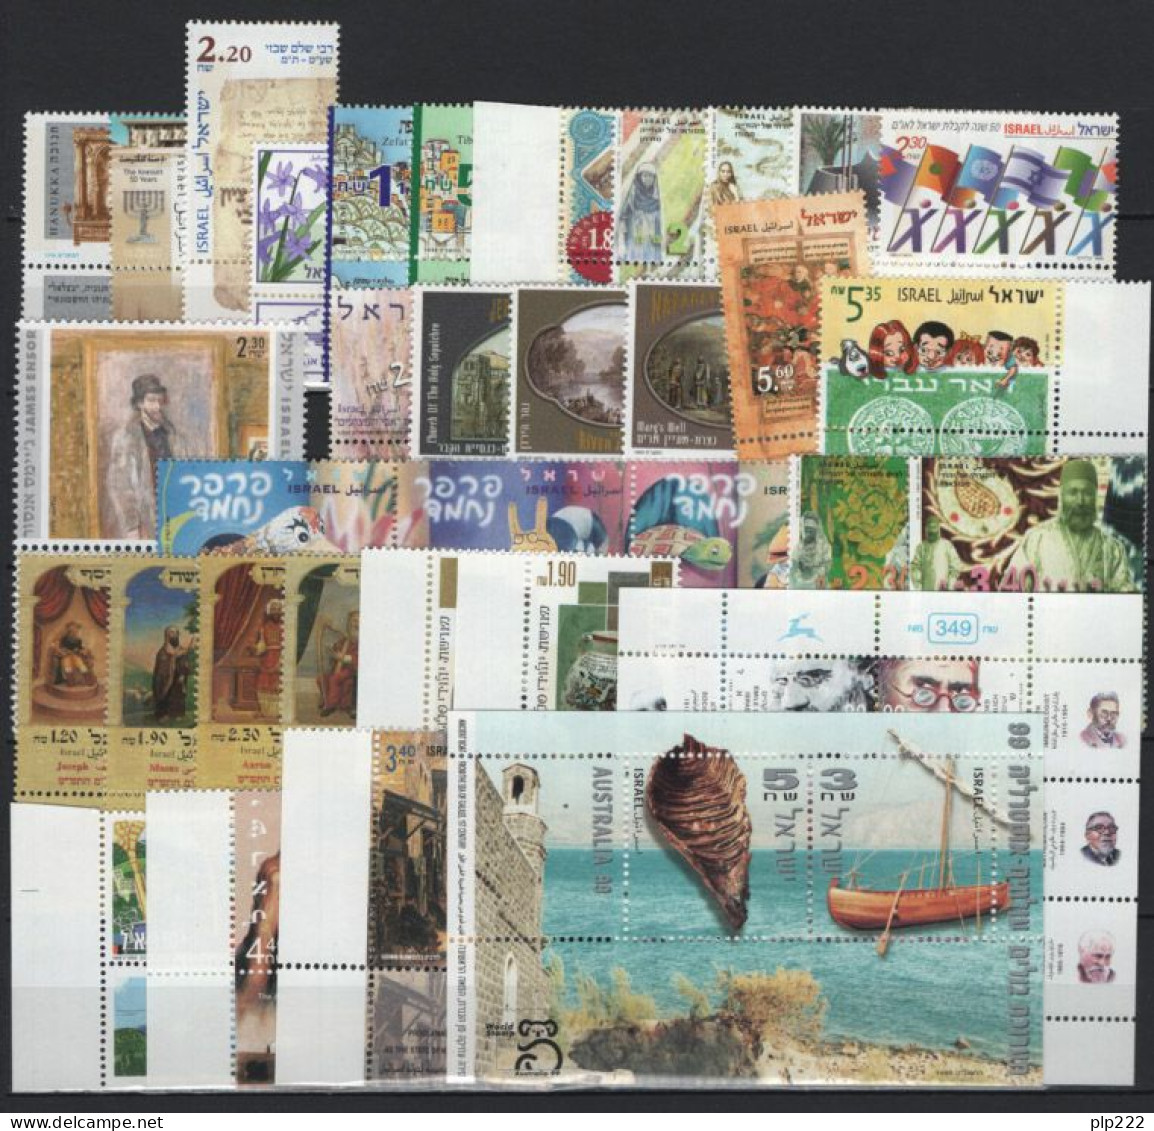 Israele 1999 Annata Completa Con Appendice / Complete Year Set With Tab **/MNH VF - Années Complètes